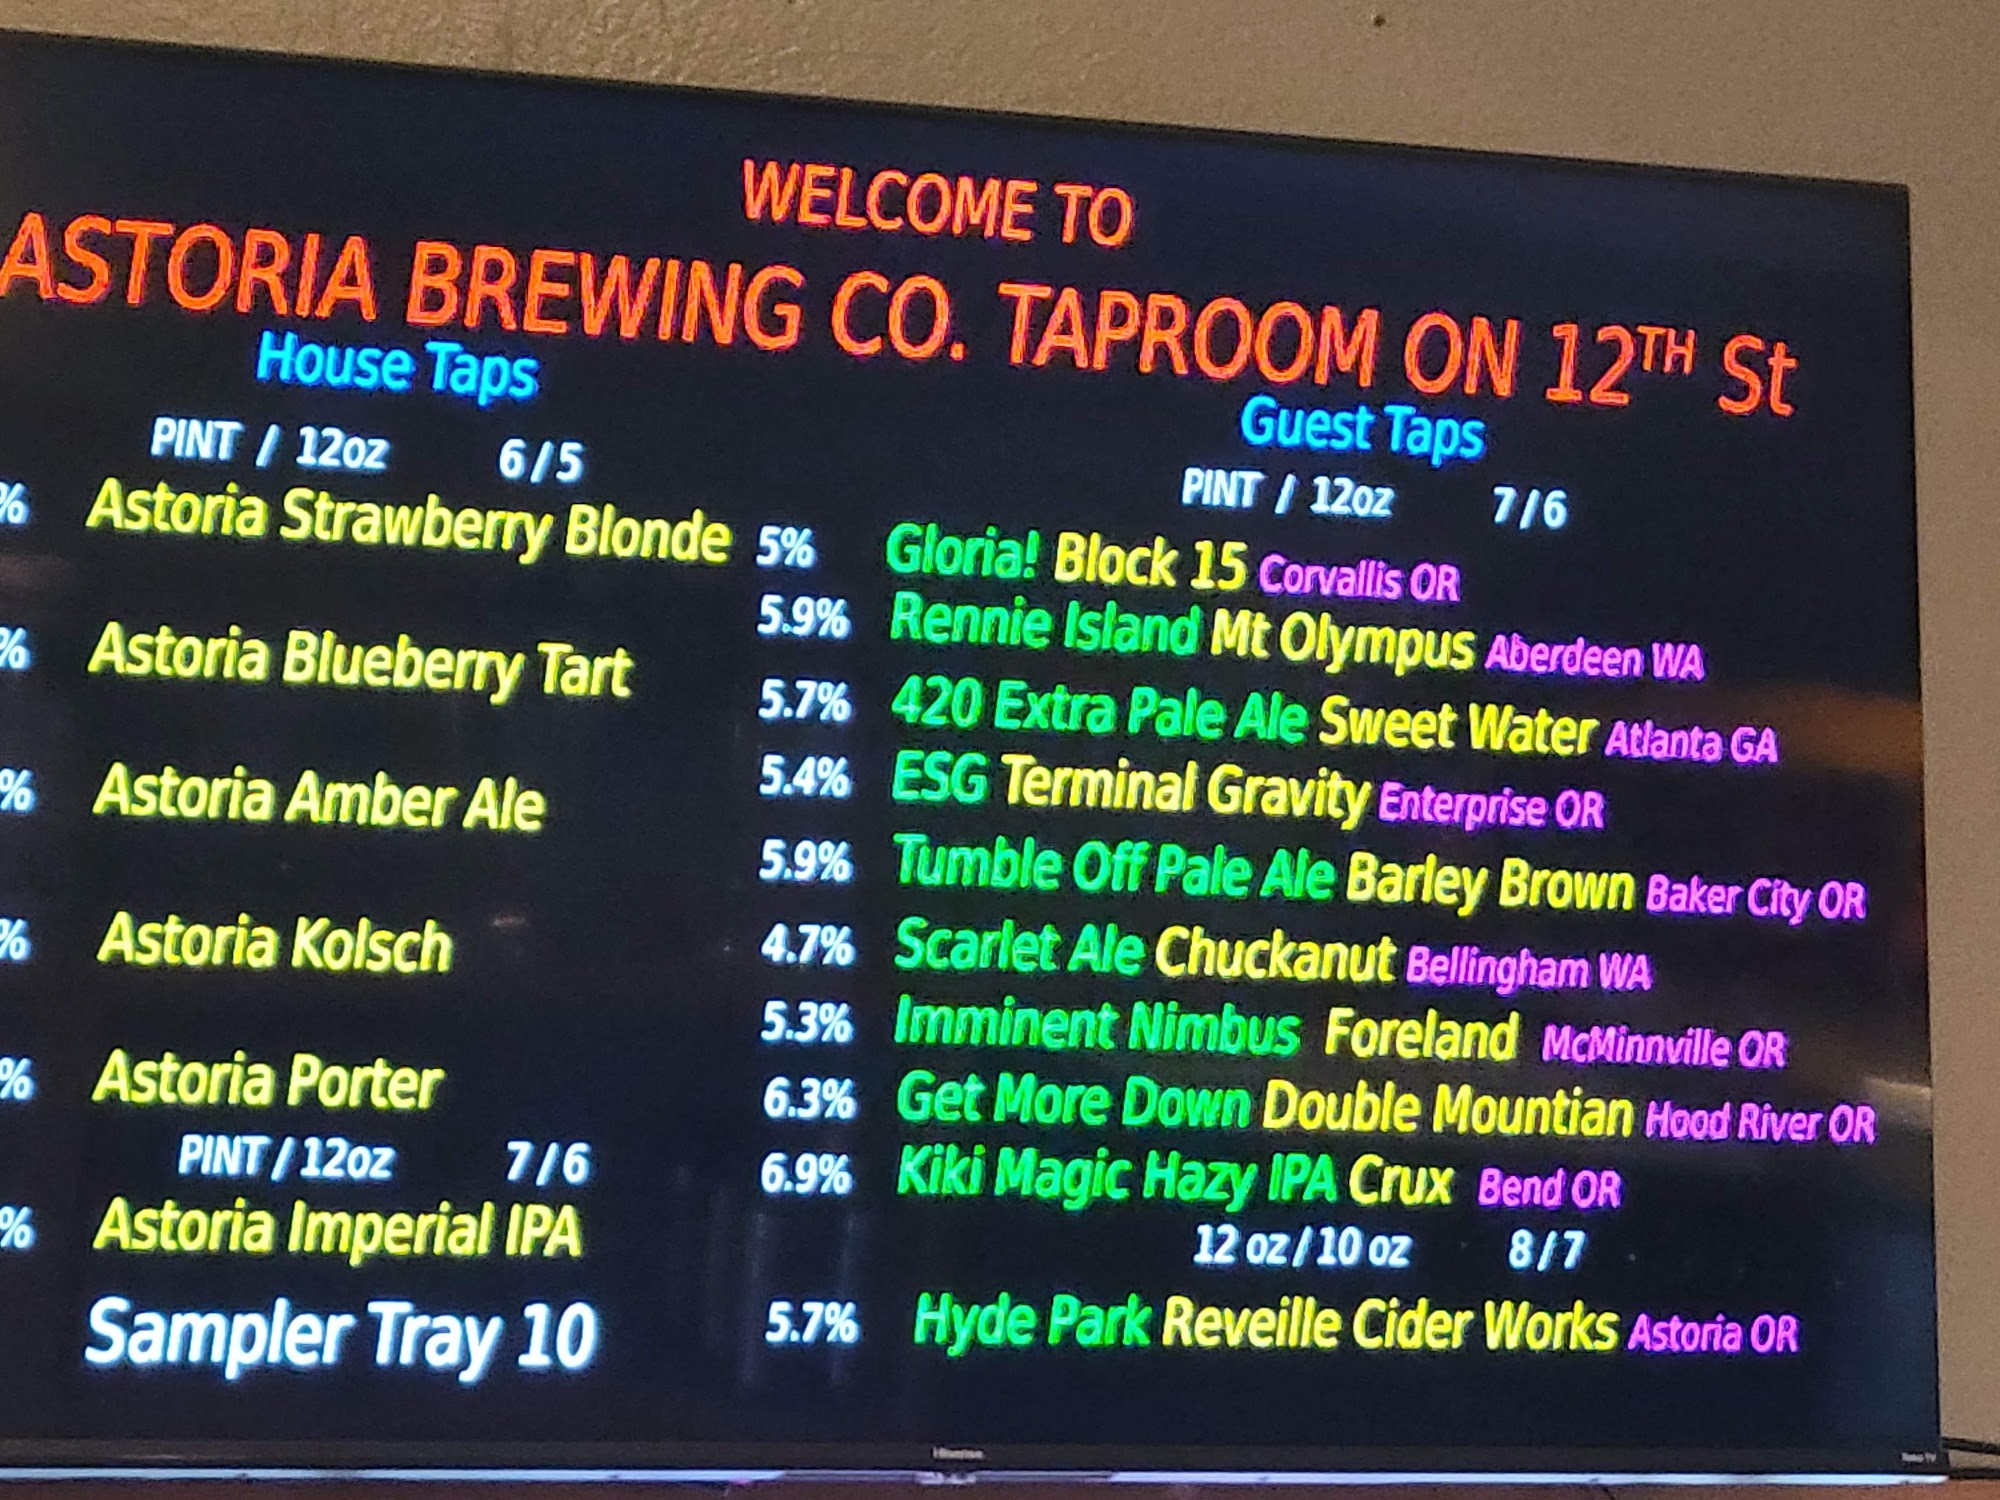 Astoria Brewing Co Taproom on 12th